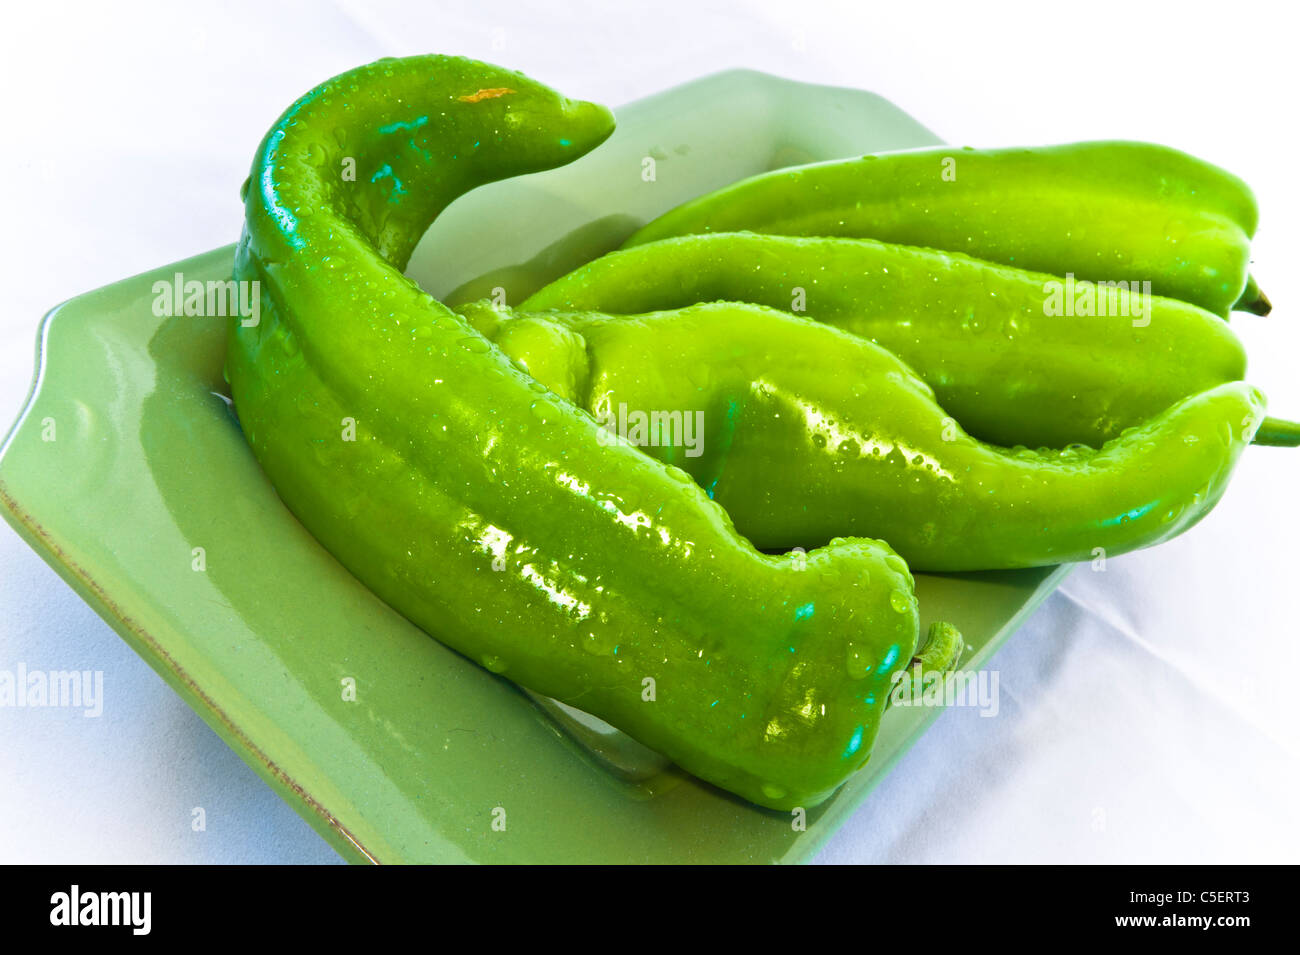 Green chili peppers are large, mild chilies are available in most local grocery stores. Stock Photo